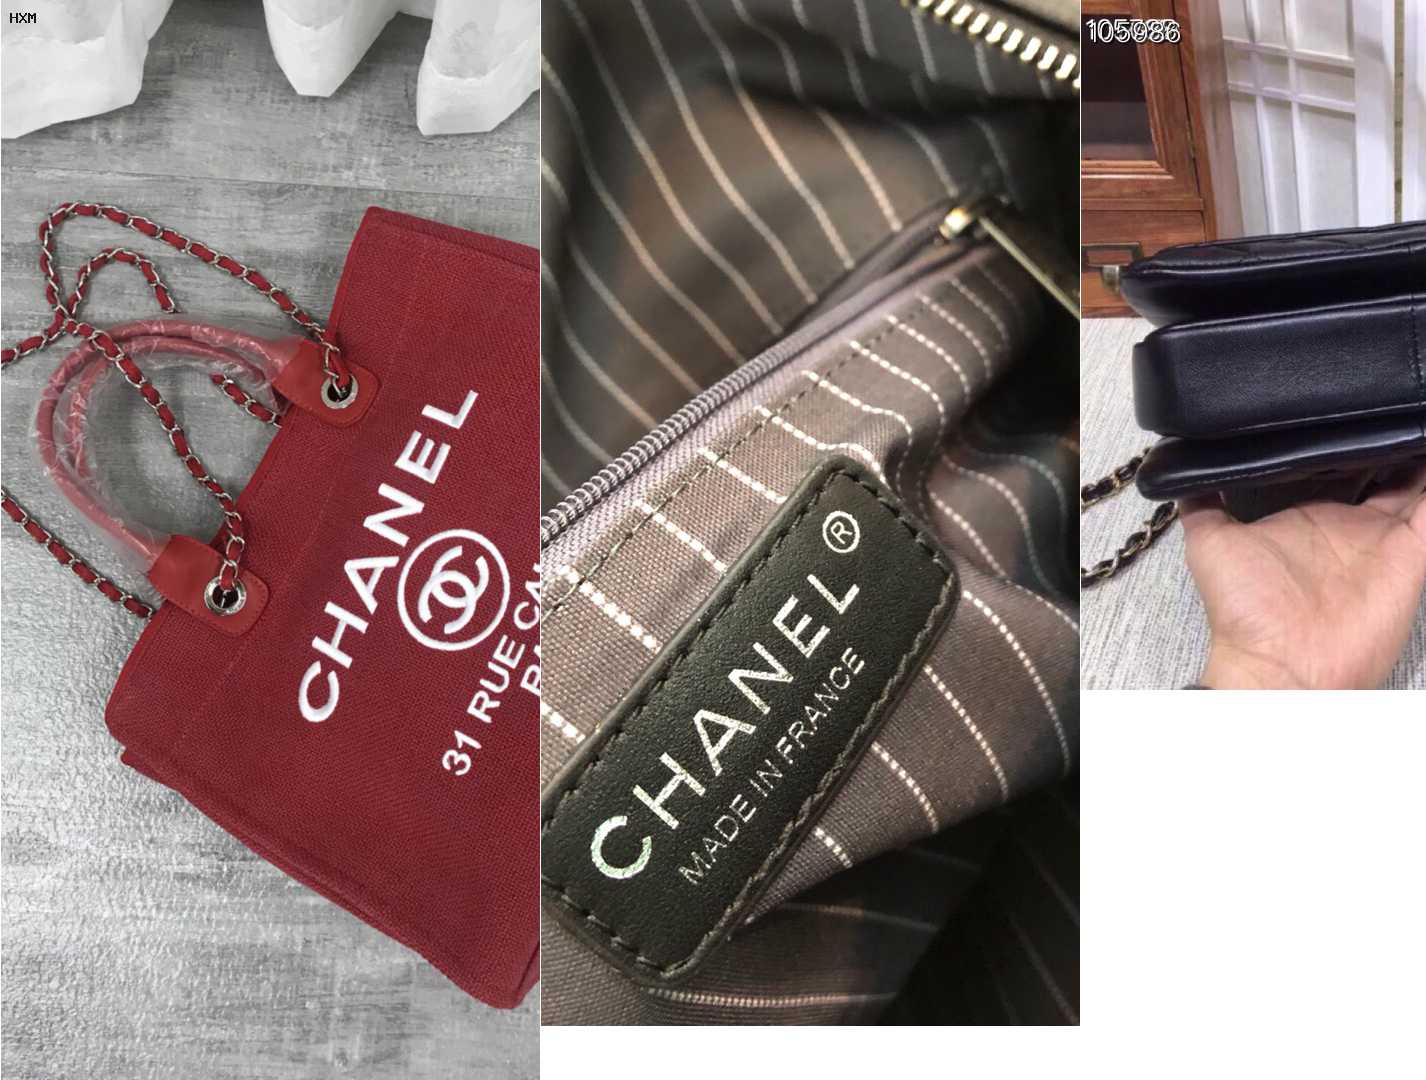 chanel petite maroquinerie france